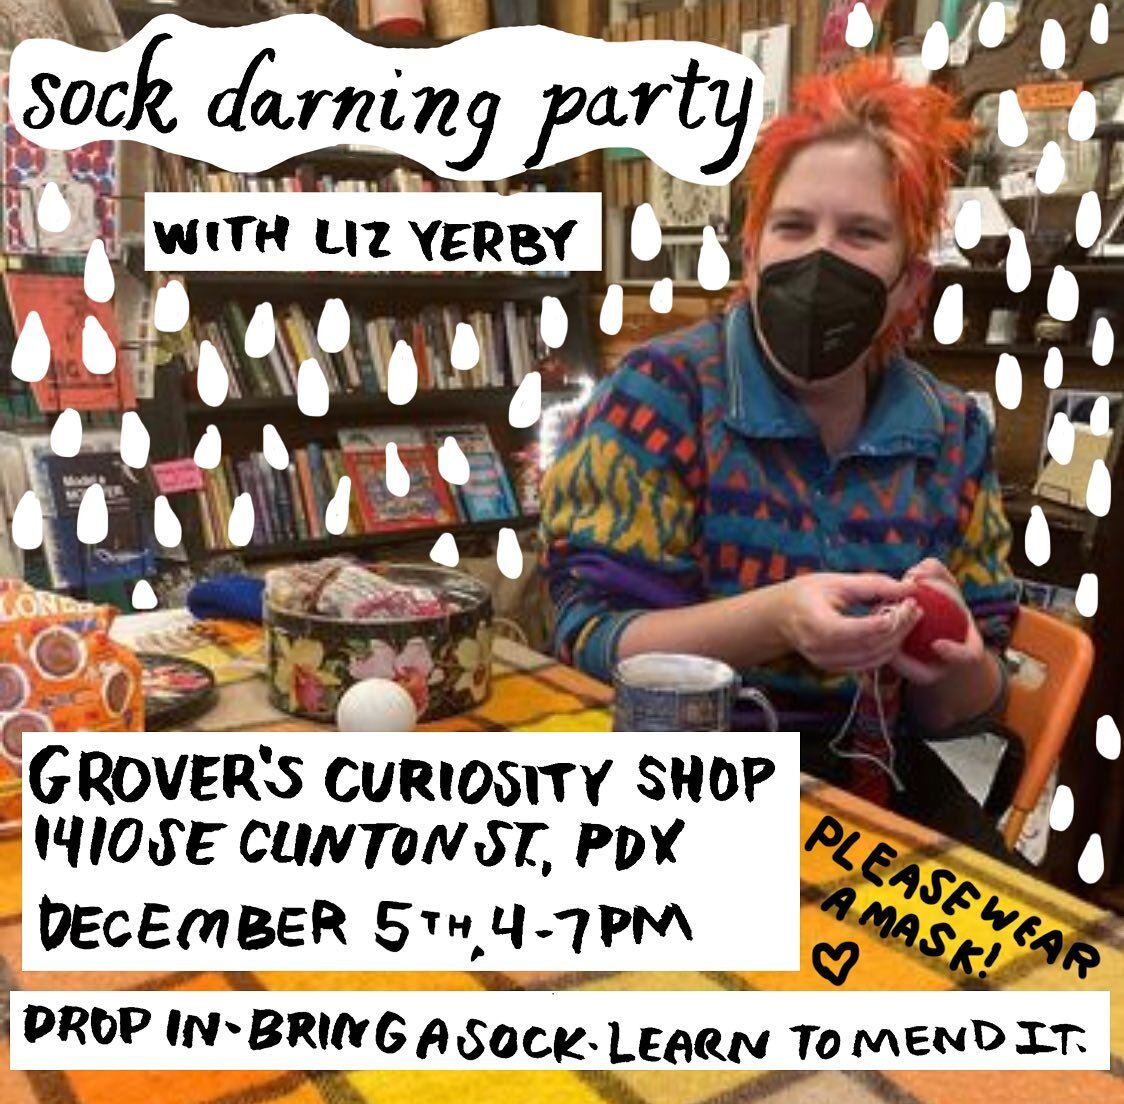 I&rsquo;m doing it again! I&rsquo;ll be @groverscuriosityshop 12/5 4-7pm to help you darn wool socks or sweaters.  I&rsquo;ll have extra yarn and darning needles too. It&rsquo;s a small space so wear a mask. Let&rsquo;s hang and mend some clothes!  @